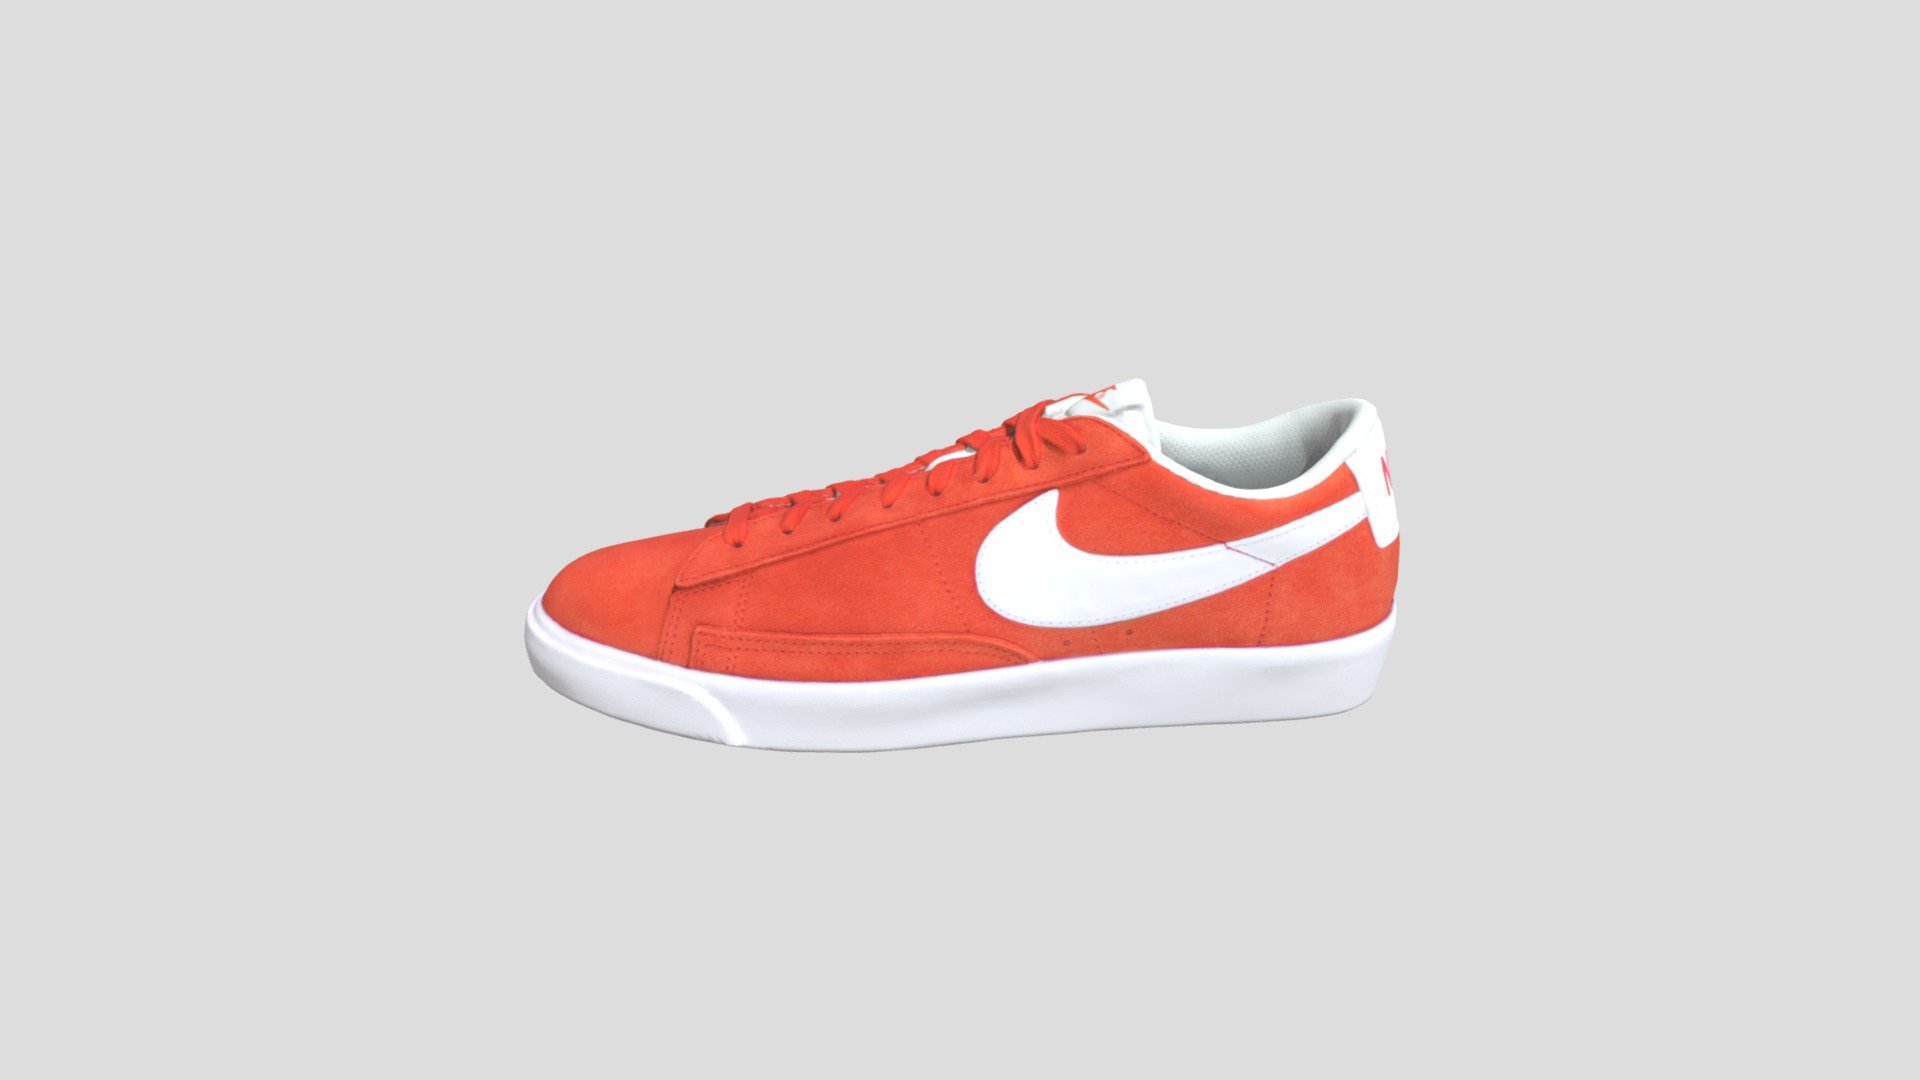 This model was created firstly by 3D scanning on retail version, and then being detail-improved manually, thus a 1:1 repulica of the original
PBR ready
Low-poly
4K texture
Welcome to check out other models we have to offer. And we do accept custom orders as well :) - Nike Blazer Low 白橙_CZ4703-800 - Buy Royalty Free 3D model by TRARGUS 3d model